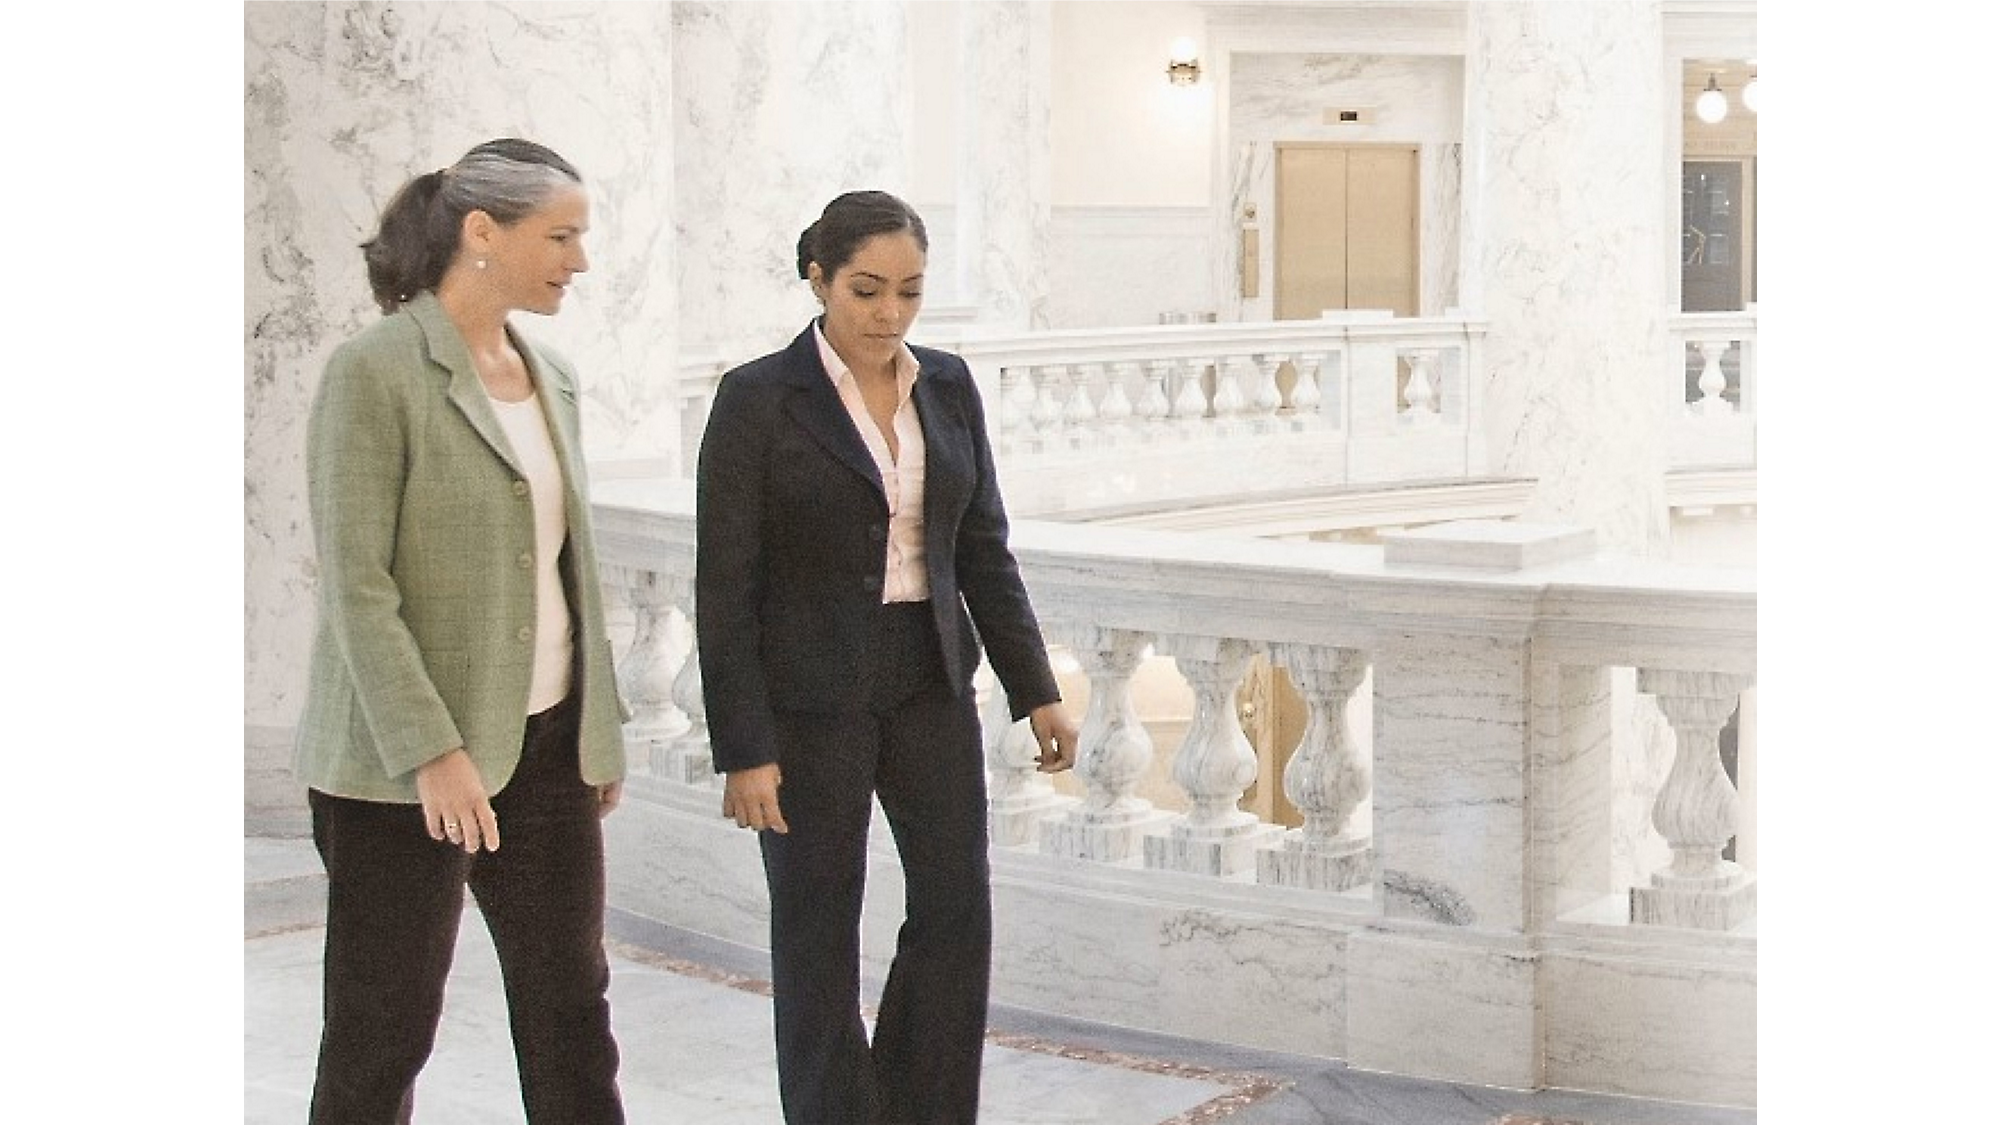 Two women walking and conversing in a marble hall with ornate balustrades in the background.